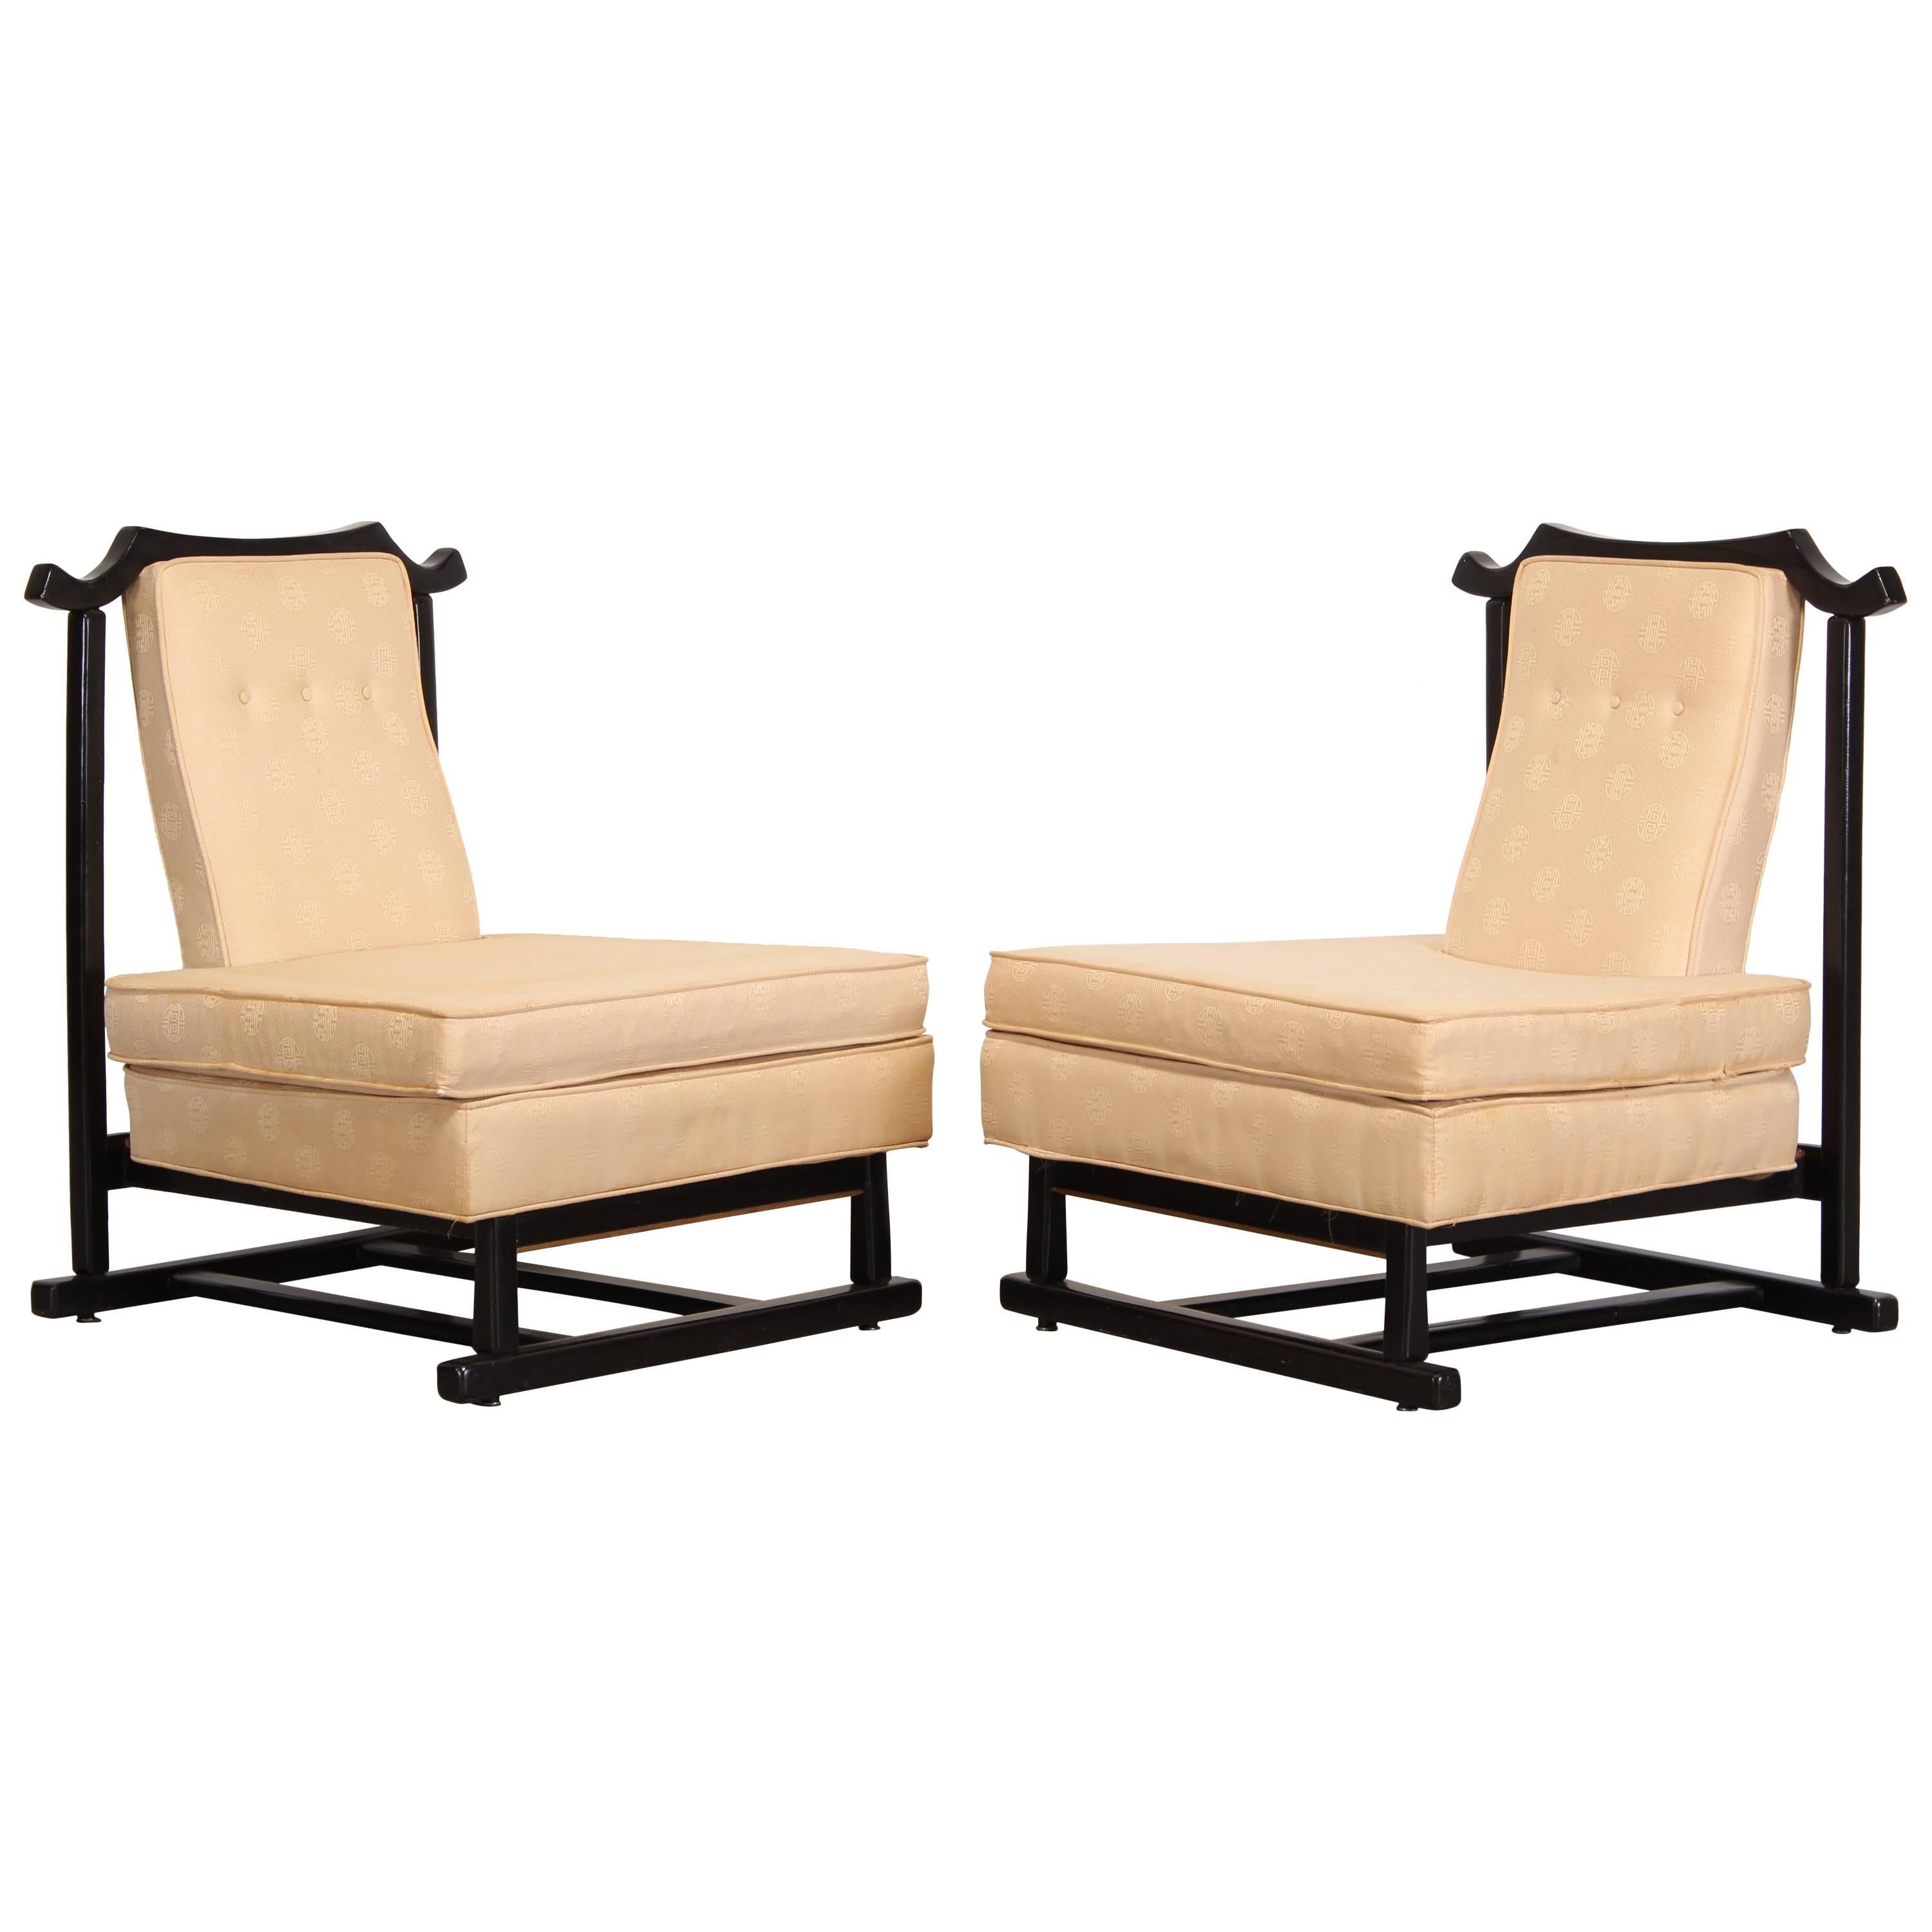 Pair of James Mont Asian Style Chairs, 1950